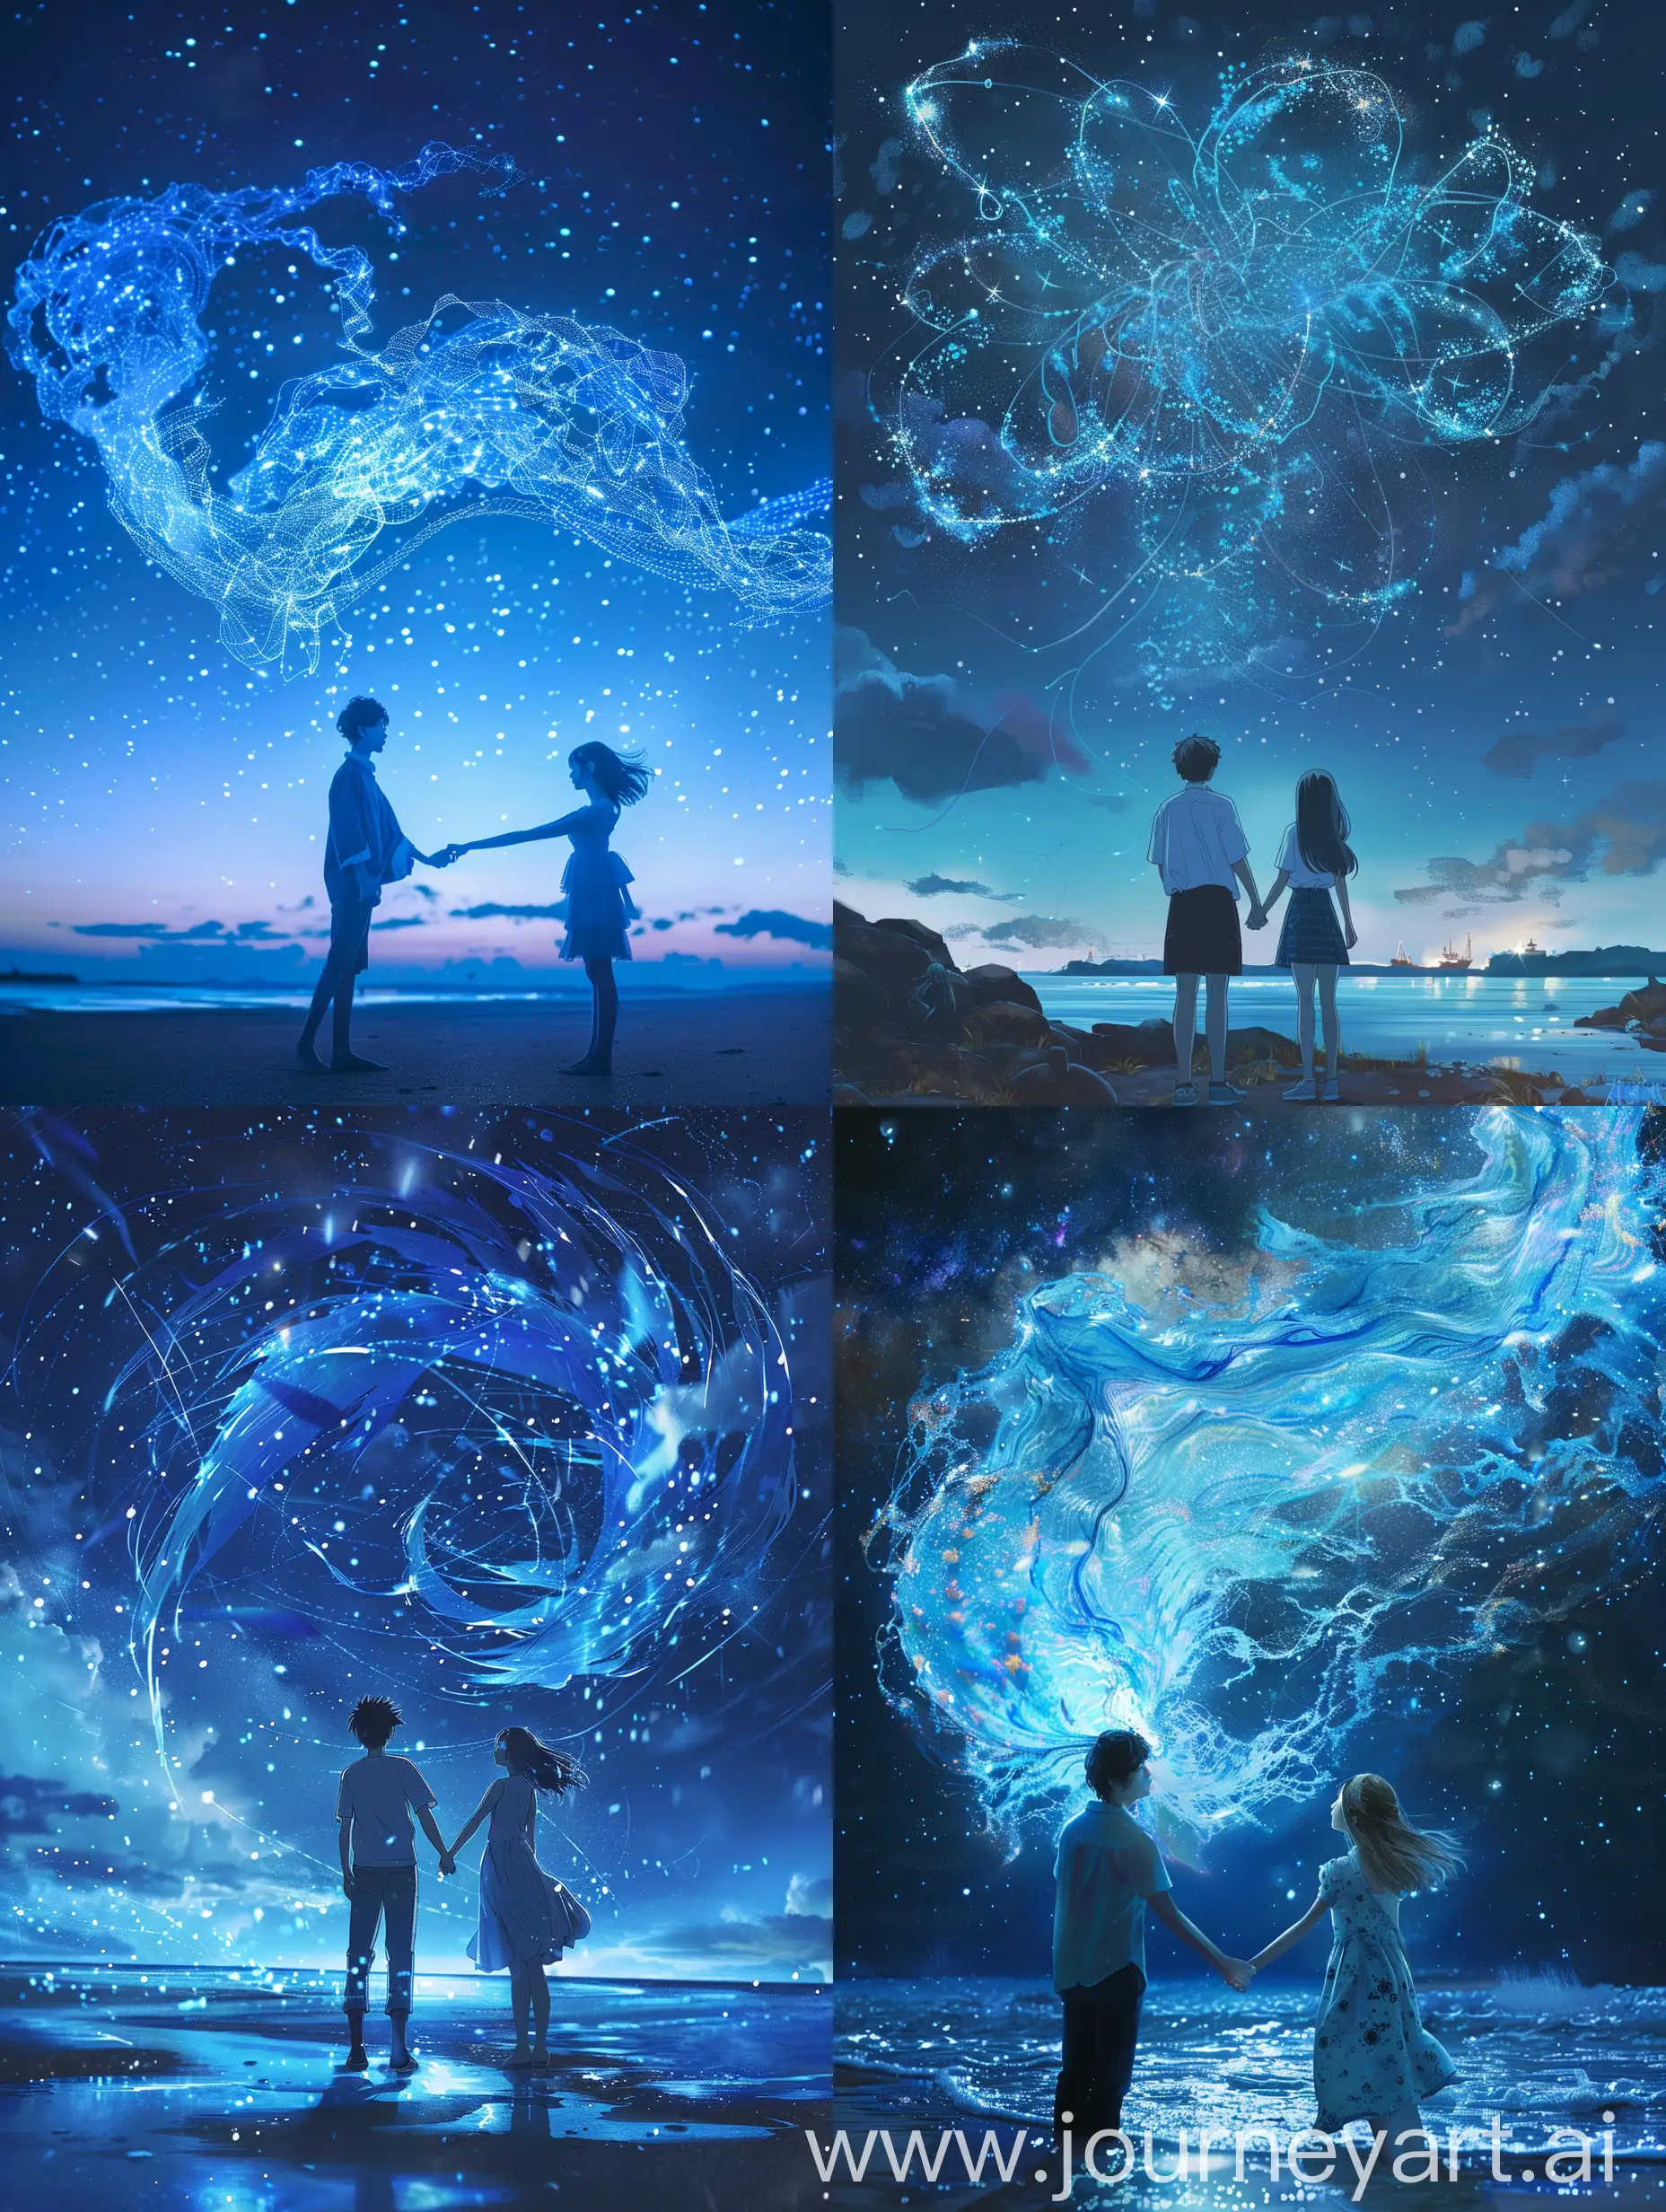 Rei, a marine biologist, meets Aoi, an artist inspired by the wind. They create a stunning wind-inspired installation together. Their friendship turns to love under the stars. Hand in hand, they watch their creation dance, promising forever.